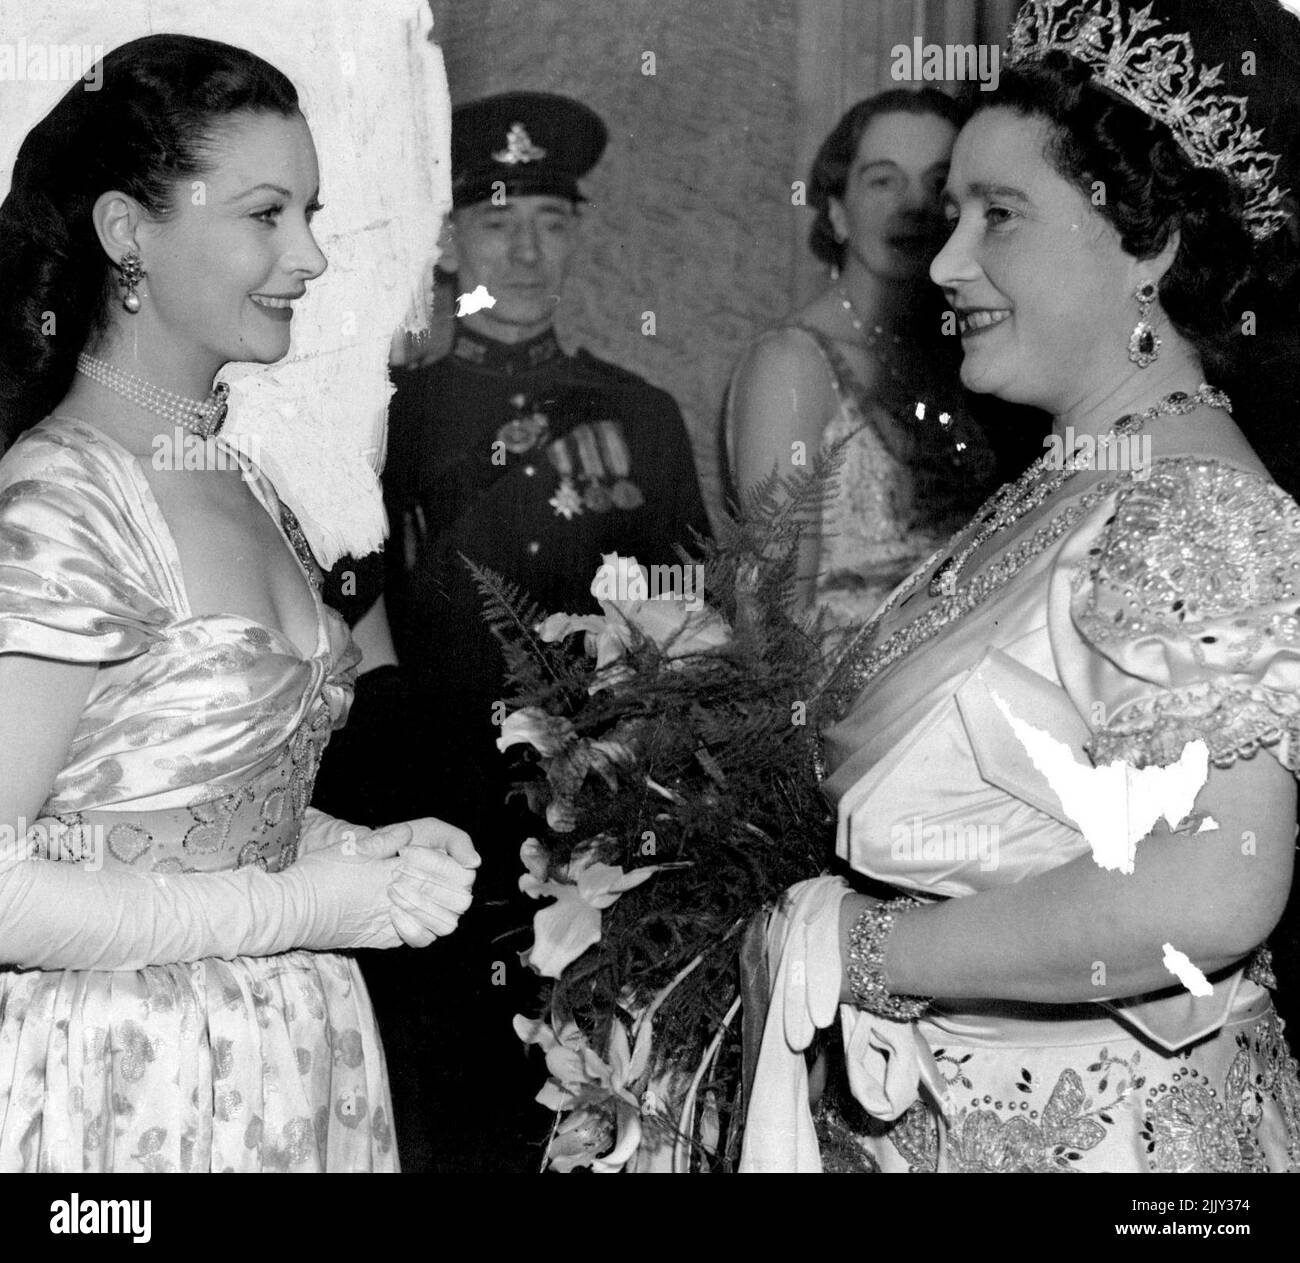 Queen, diamond tiara and ruby and diamond earrings sparkling, above her crinoline satin dress, talking with British film actress Vivien Leigh after the show. In scenes reminiscent of last year when the Royal family was nearly mobbed by film-mad crowds, a section of the huge throng broke through the 1,000 strong police cordon in Leicester Square London, and brought the Royal family's car to a halt as they arrived for the Royal Command Film Show at the Odeon Theatre. Police quickly cleared a path for the car and the King and Queen with Princess Margaret, drove on to the Odeon. November 25, 1947. Stock Photo